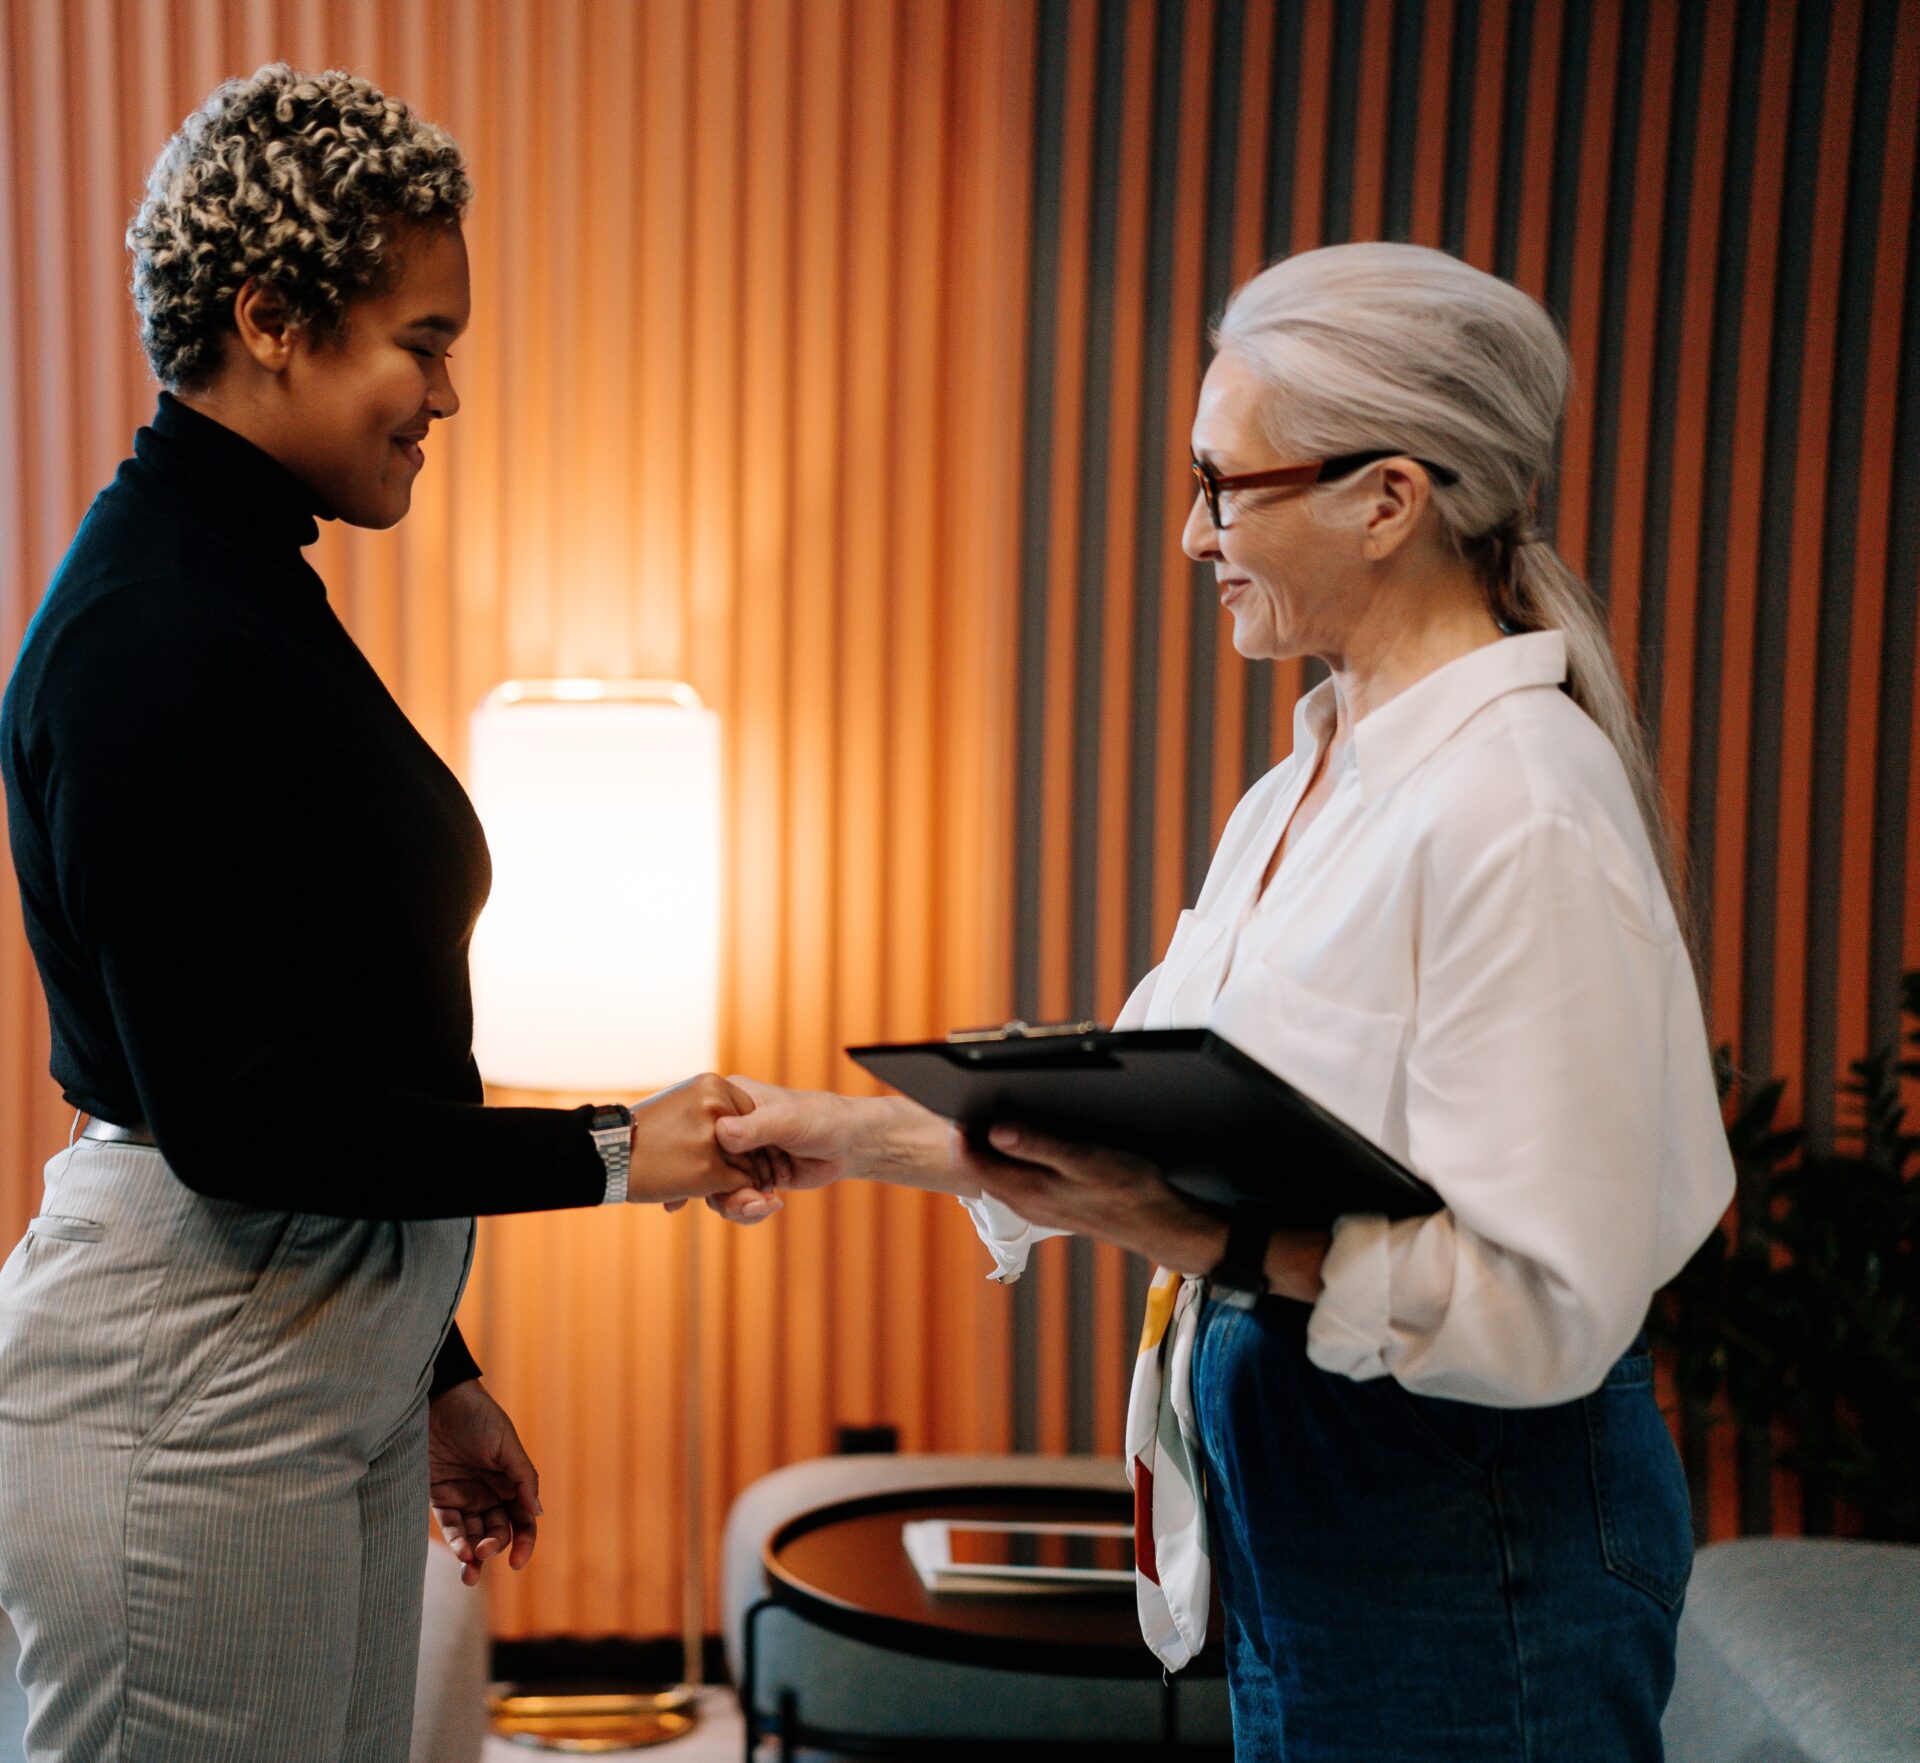 black woman shakes older professional woman's hand in an office setting